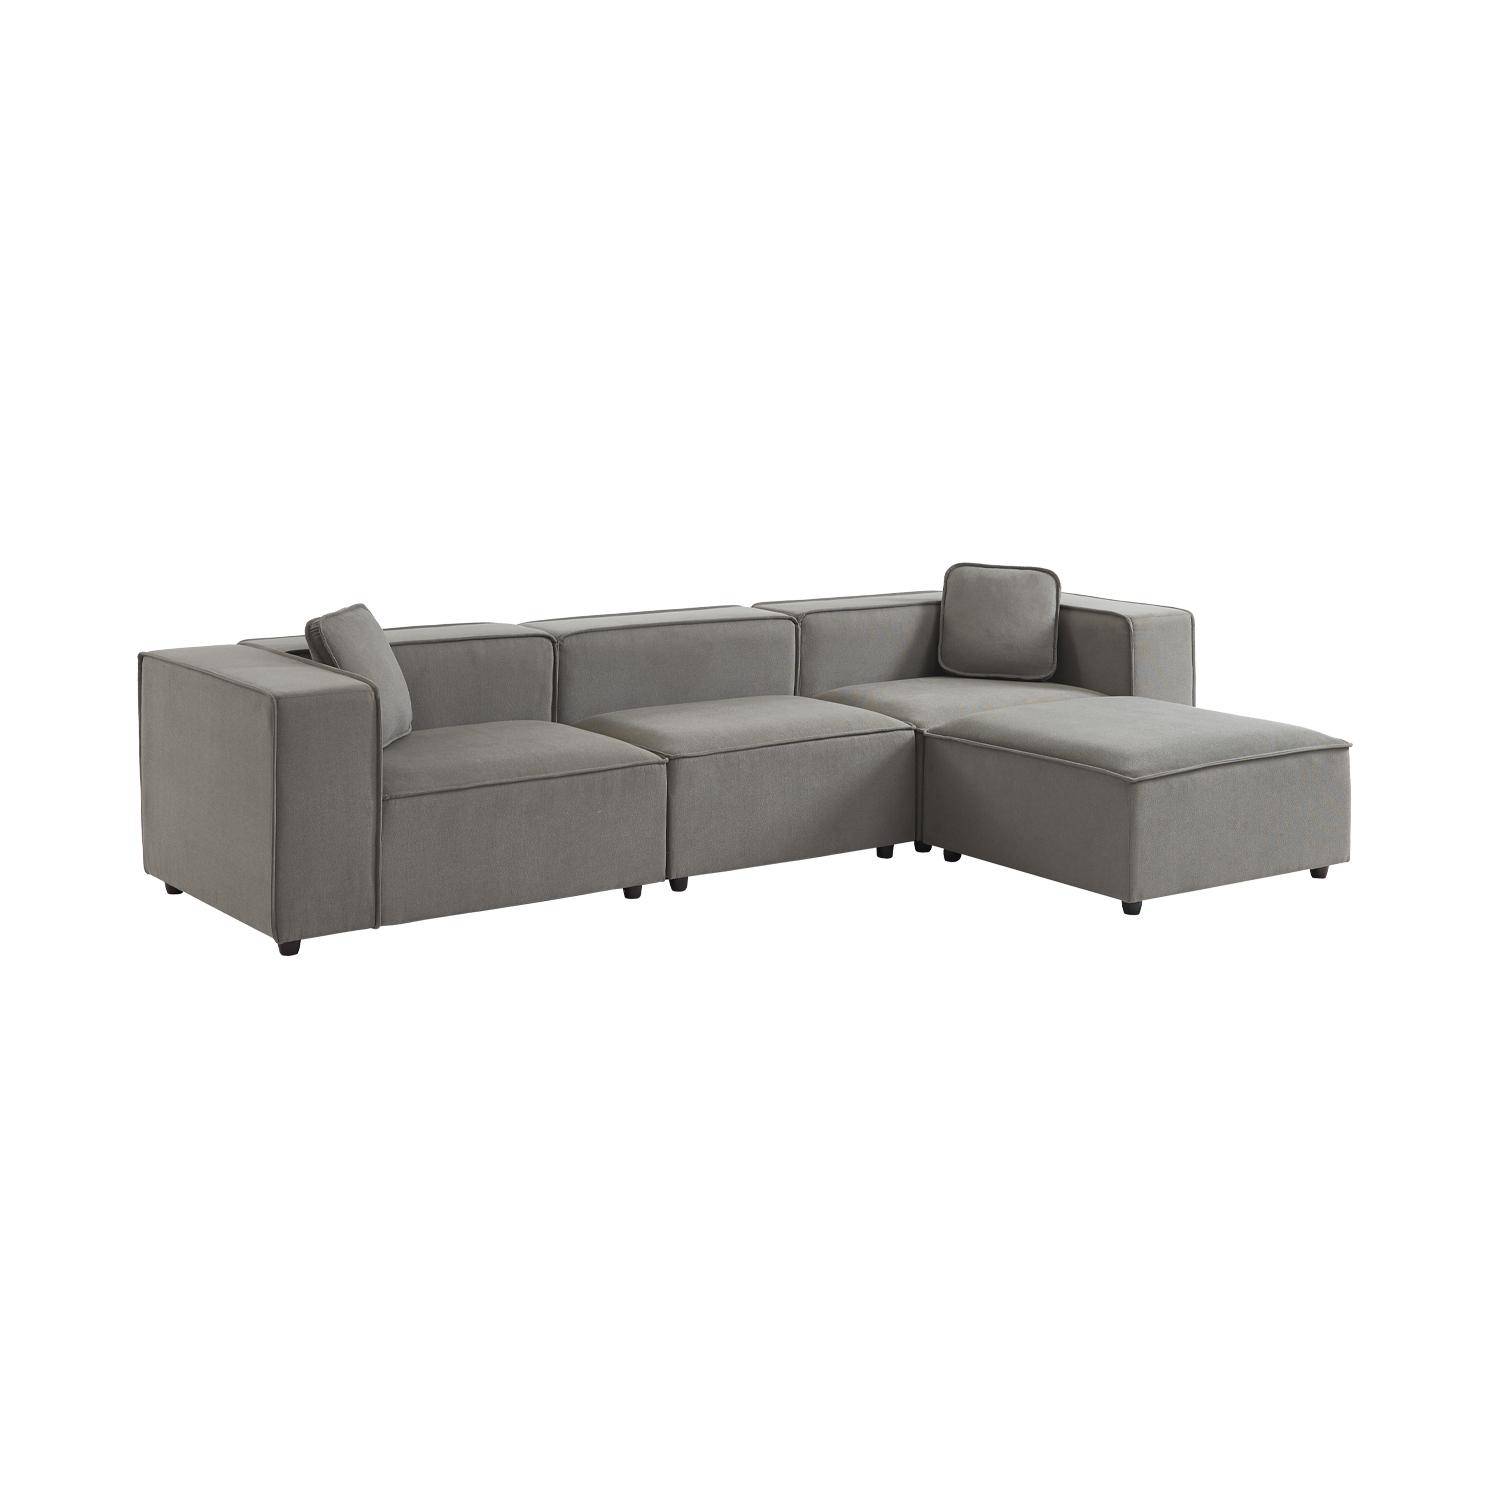 Modular sofa in water-repellent grey fabric for 3-4 people, 2 corners + 1 seat + 1 footstool Photo3